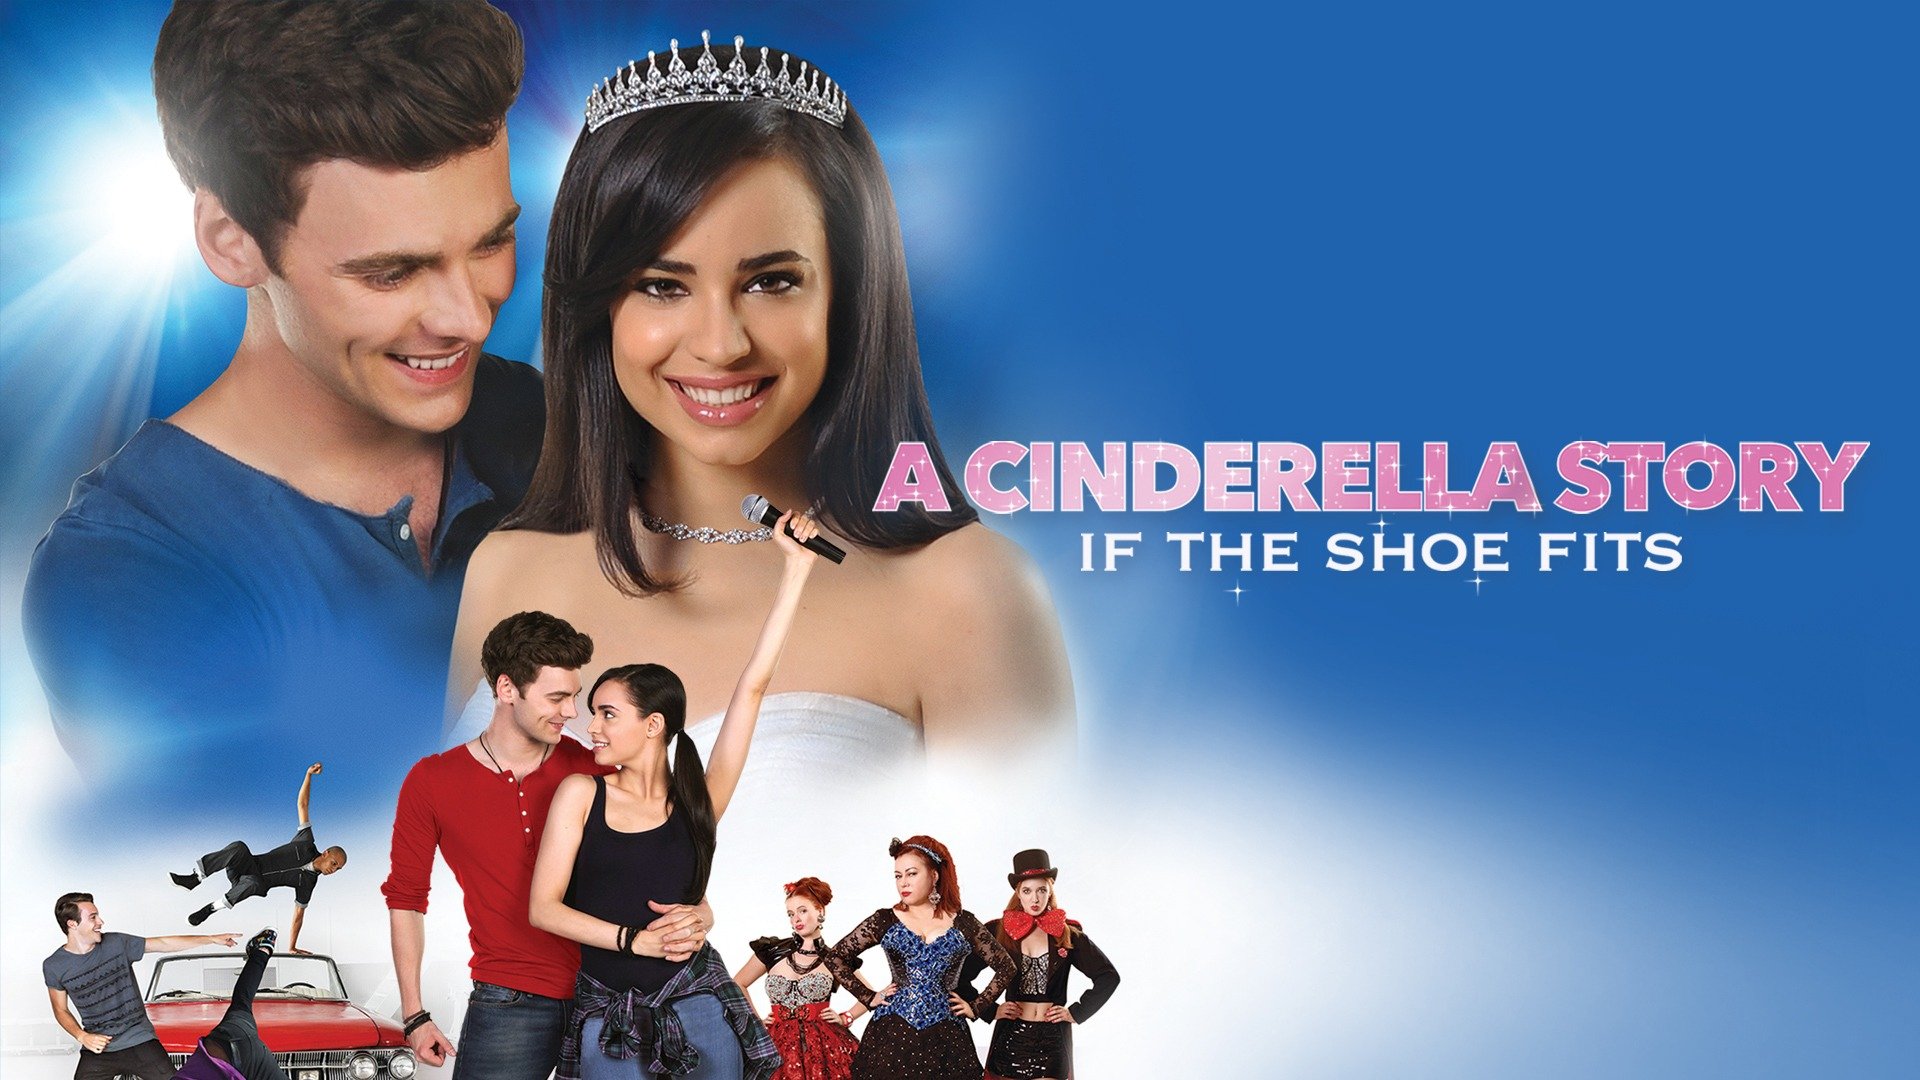 full movie a cinderella story if the shoe fits